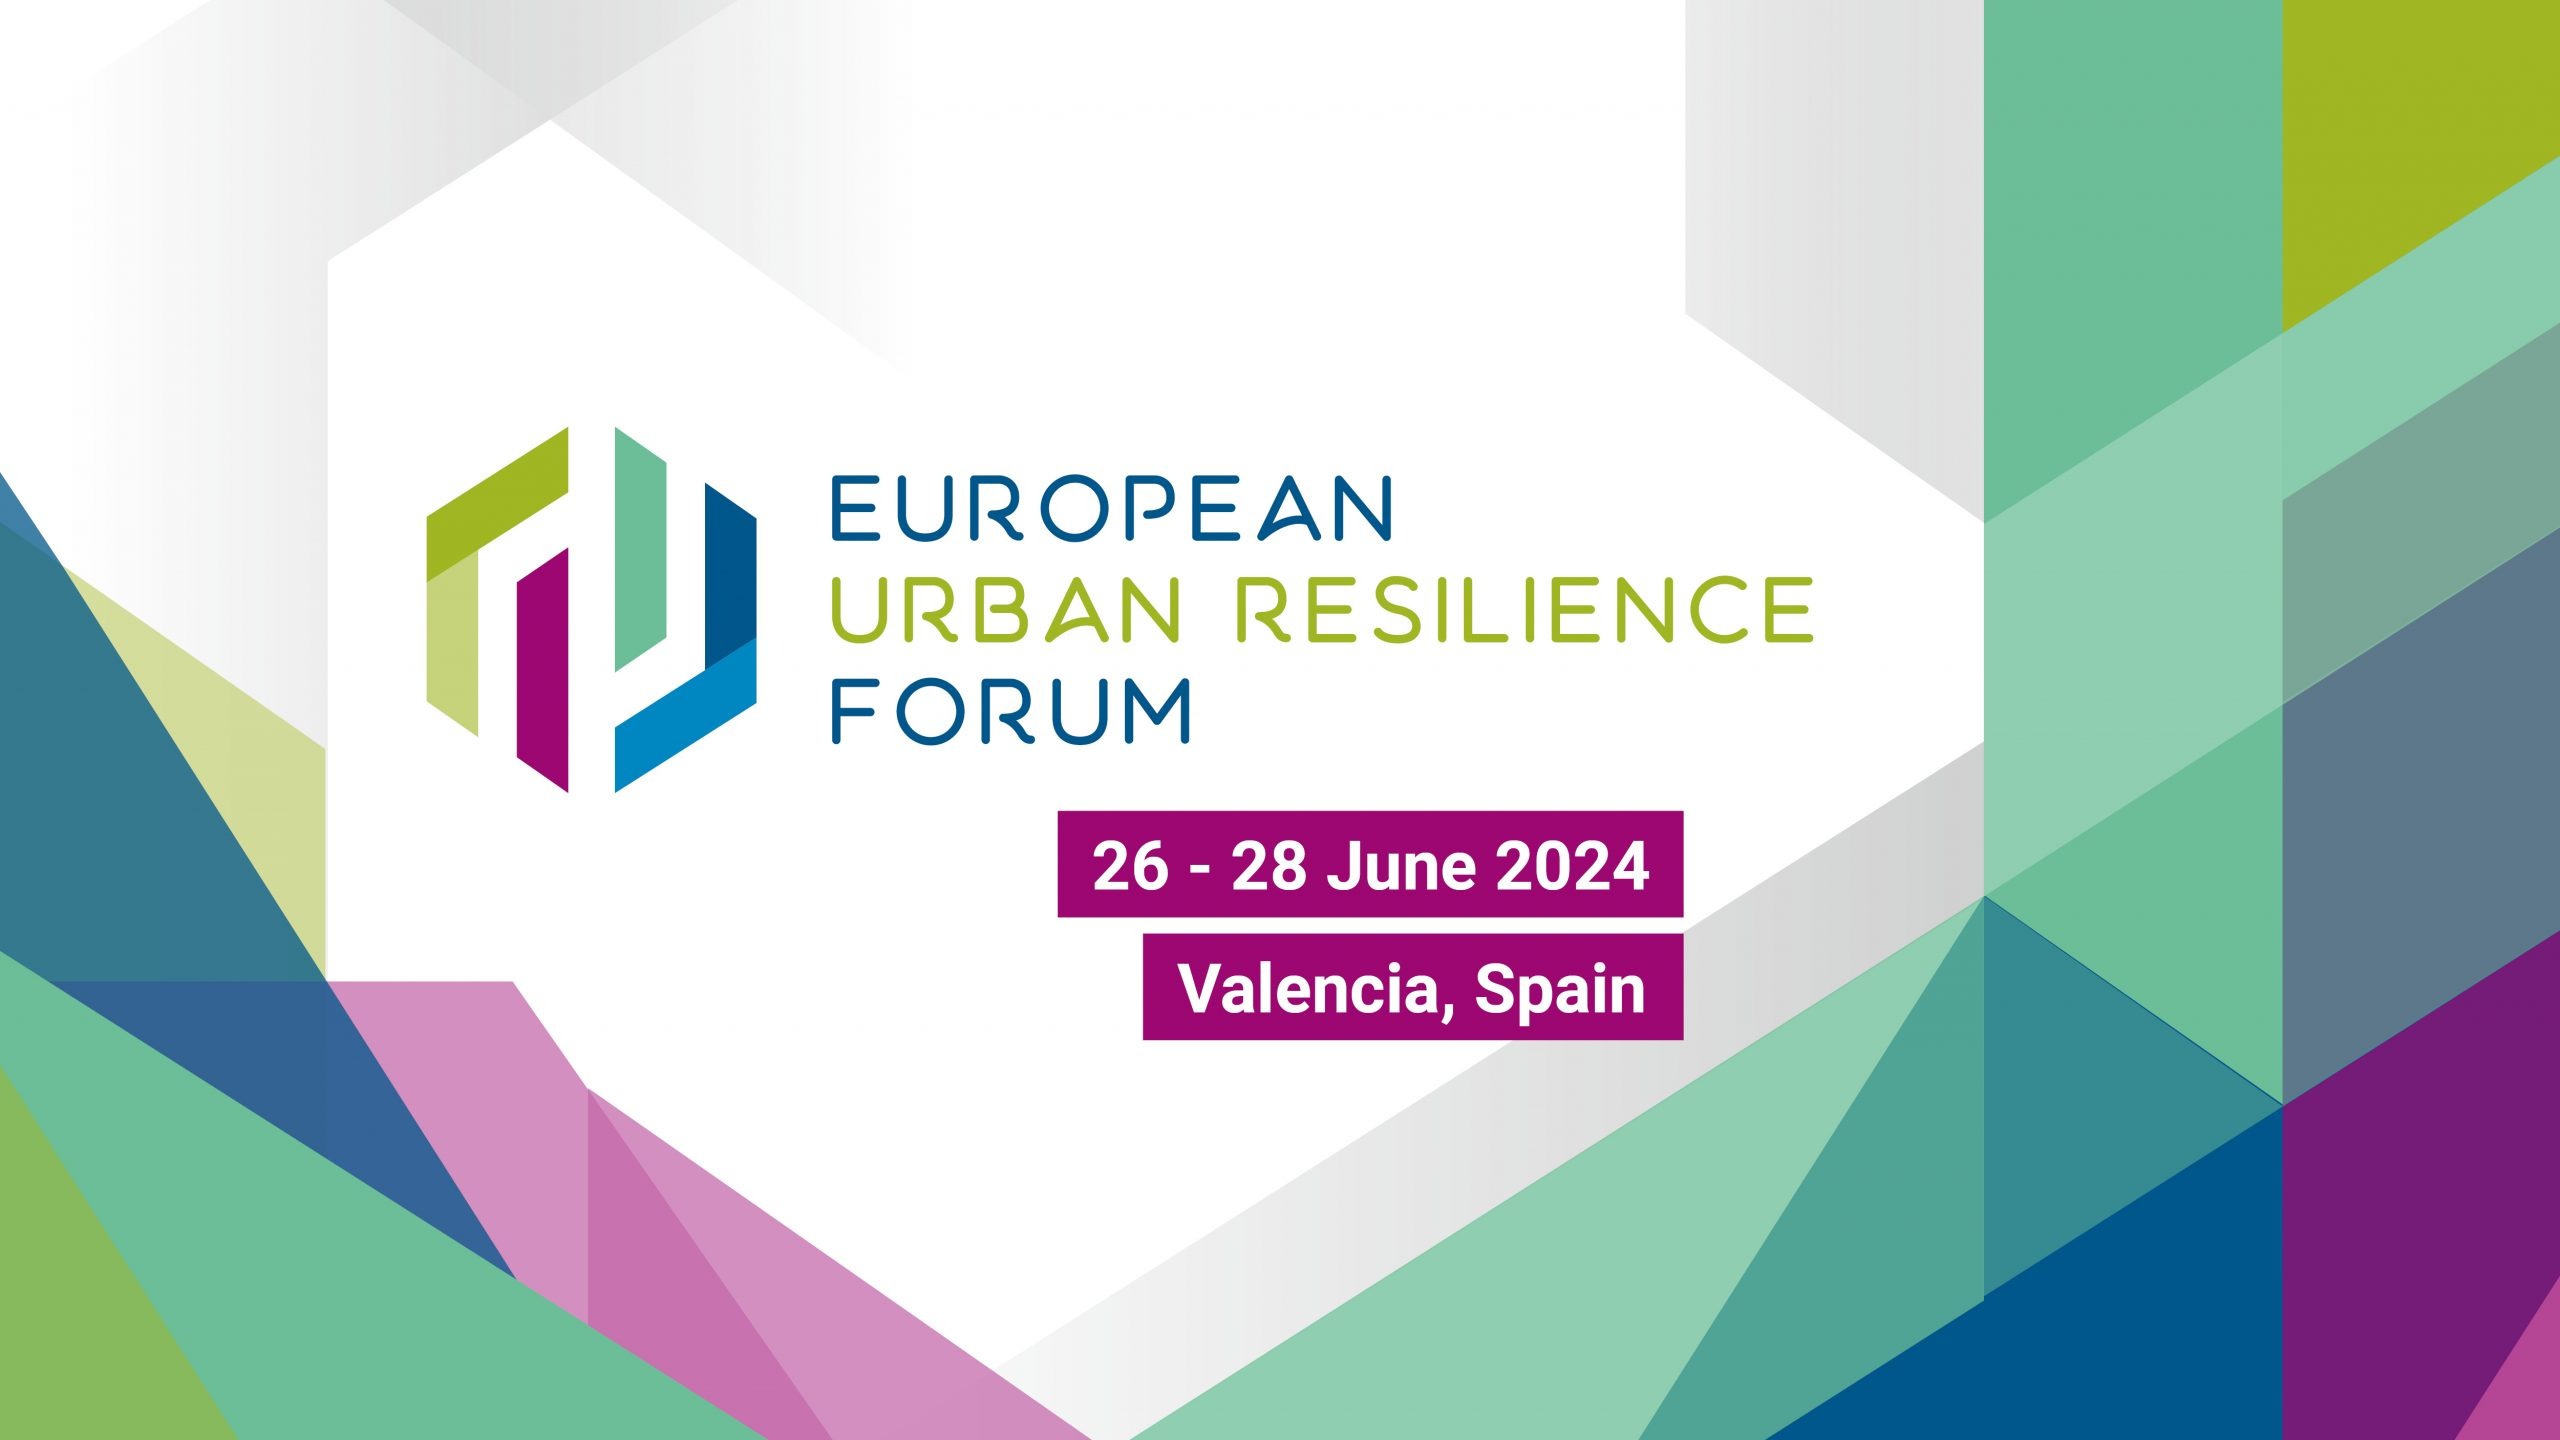 European Urban Resilience Forum 2024: Connecting Cities, Building Resilience, Forging the Future